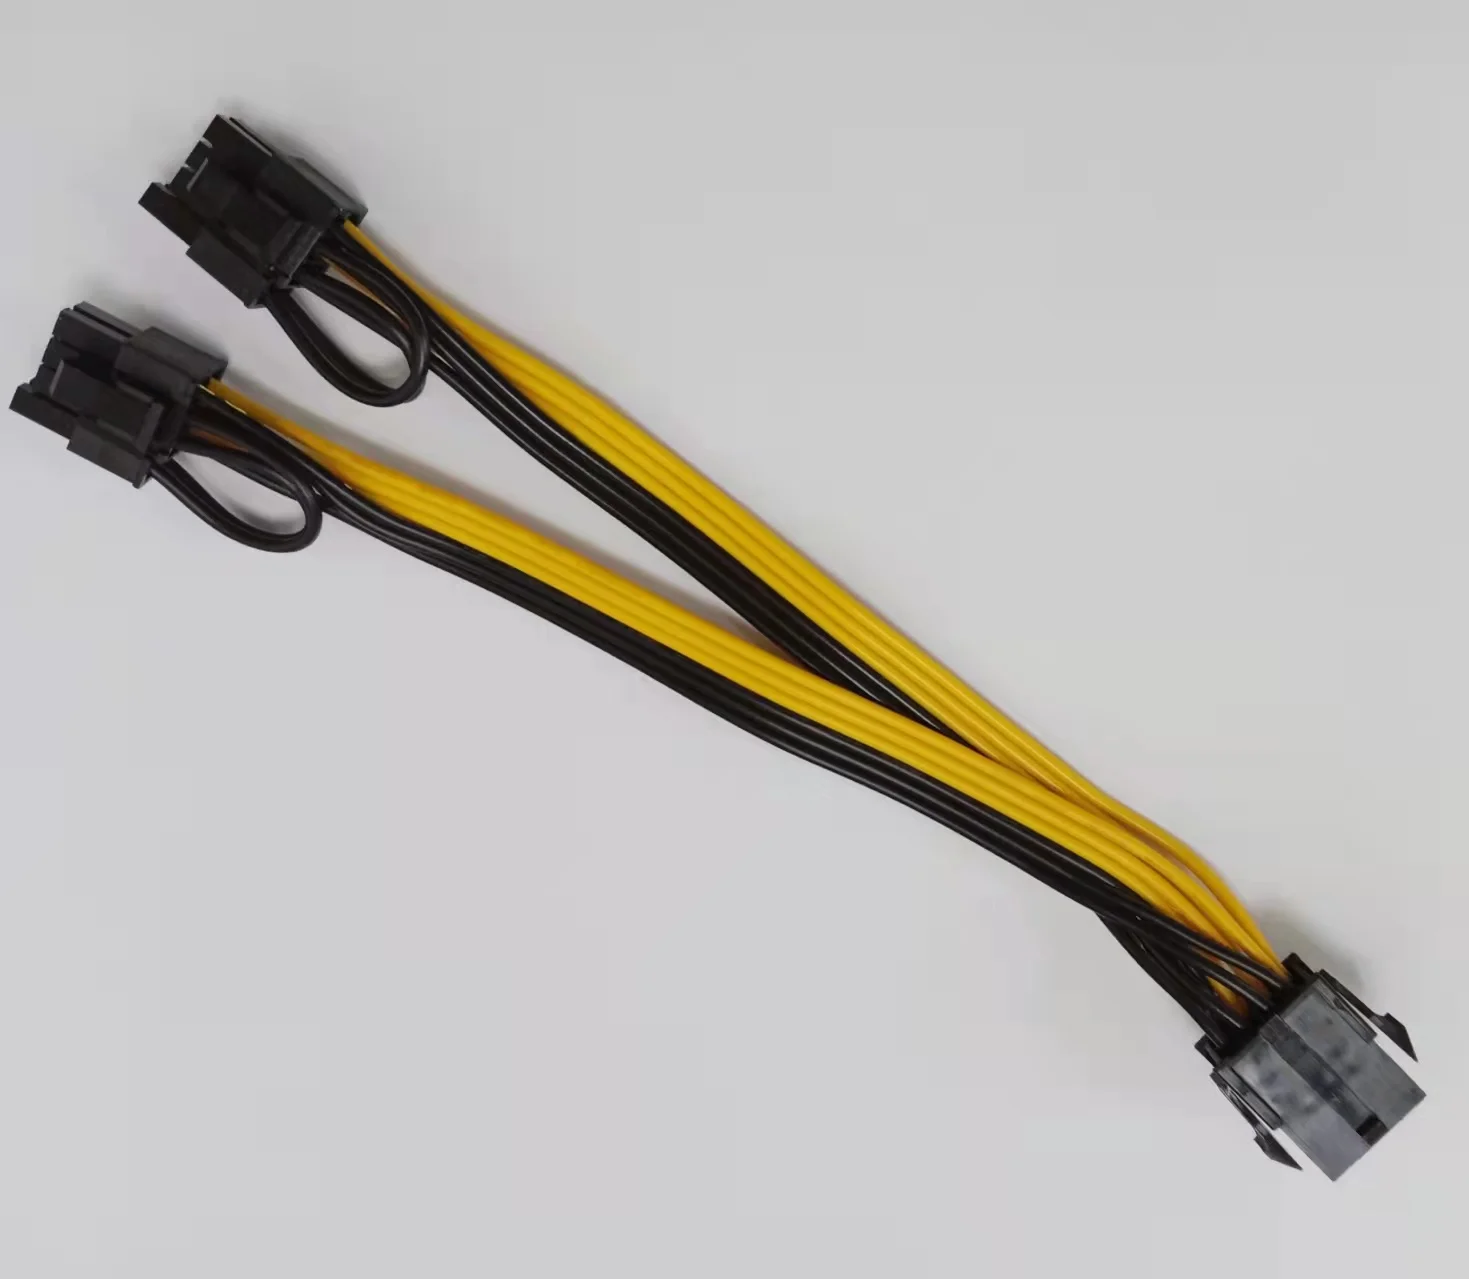 

FYX ORIGINAL Hot sale ( 6+2 ) Graphics Video Card 4.0 16x 8Pin riser cable pcie female to dual 8 pin male price